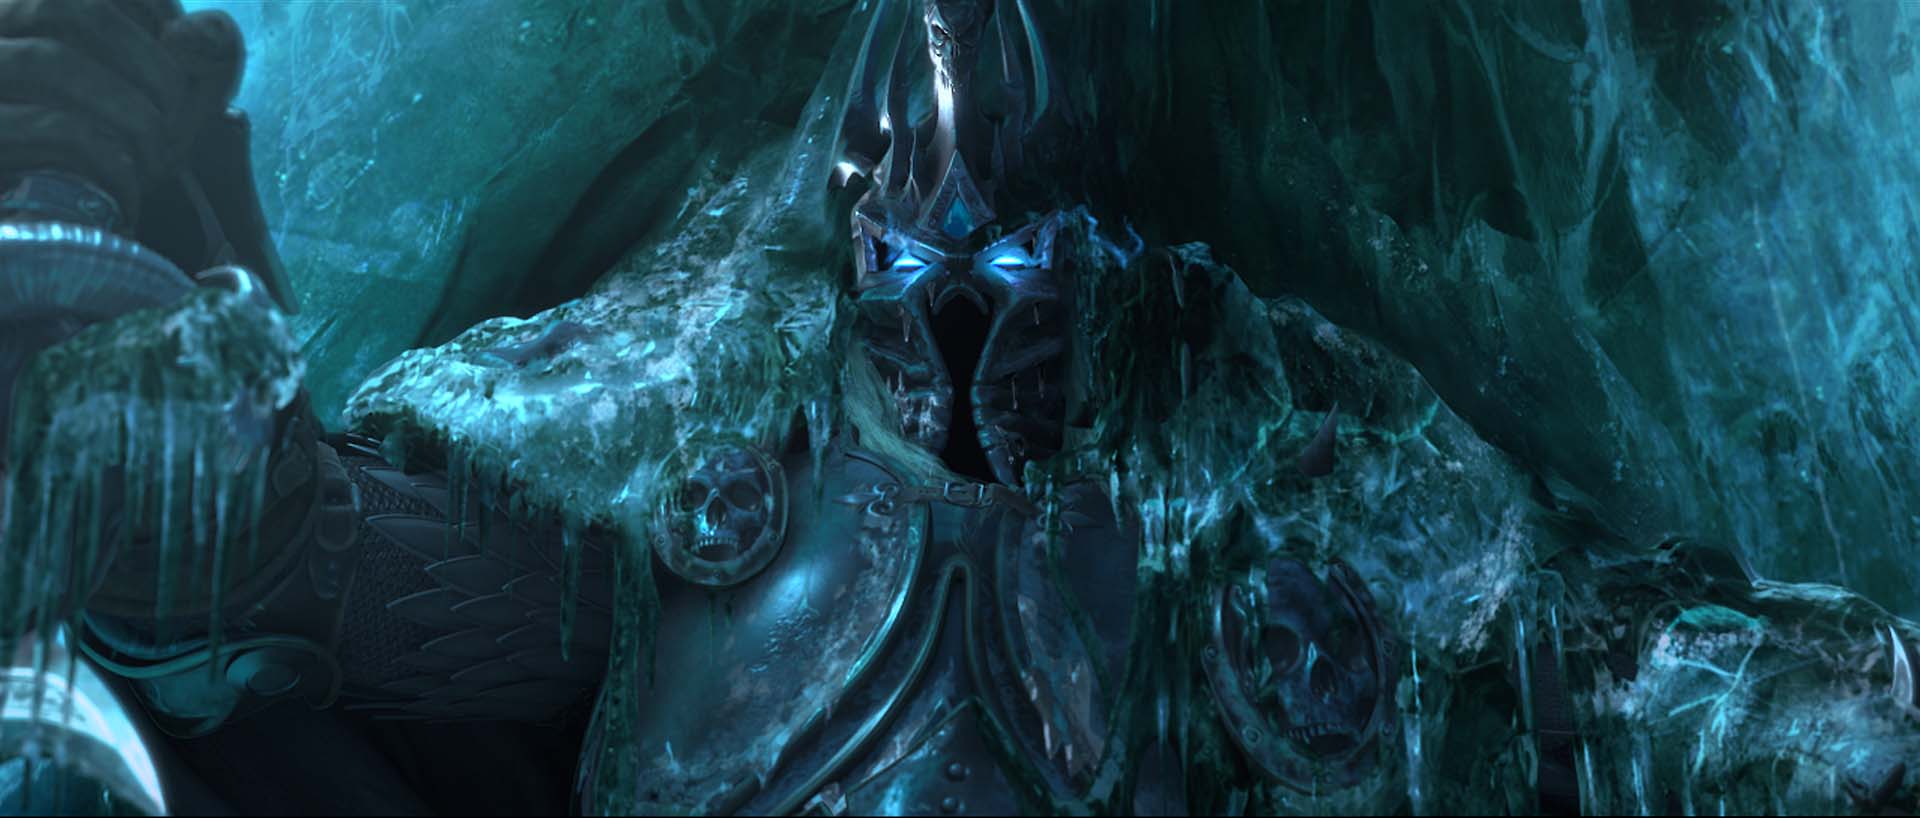 Play a Death Knight in Wrath of the Lich King Classic™ Before 11